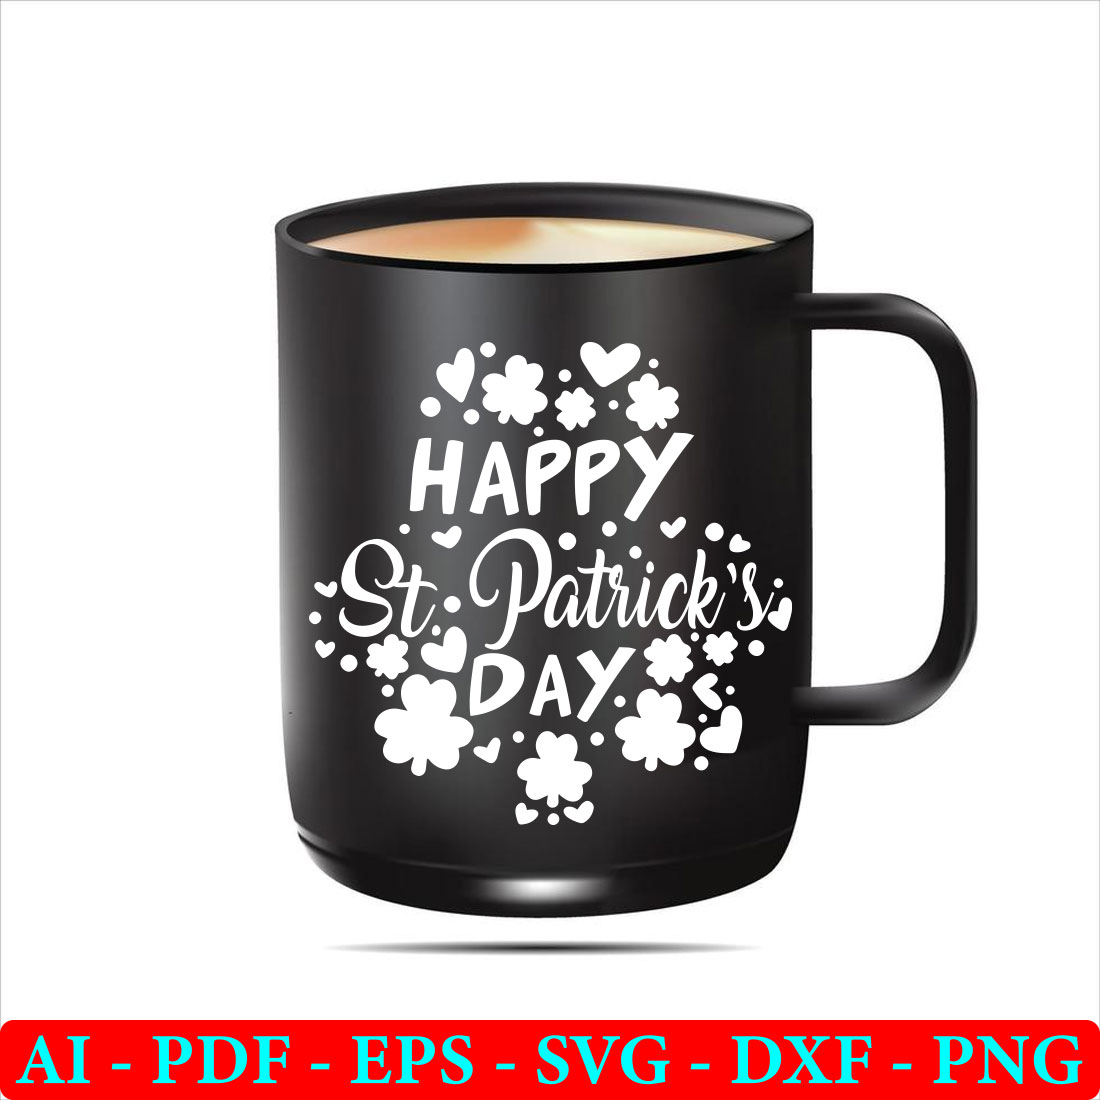 Black coffee mug with the words happy st patrick's day on it.